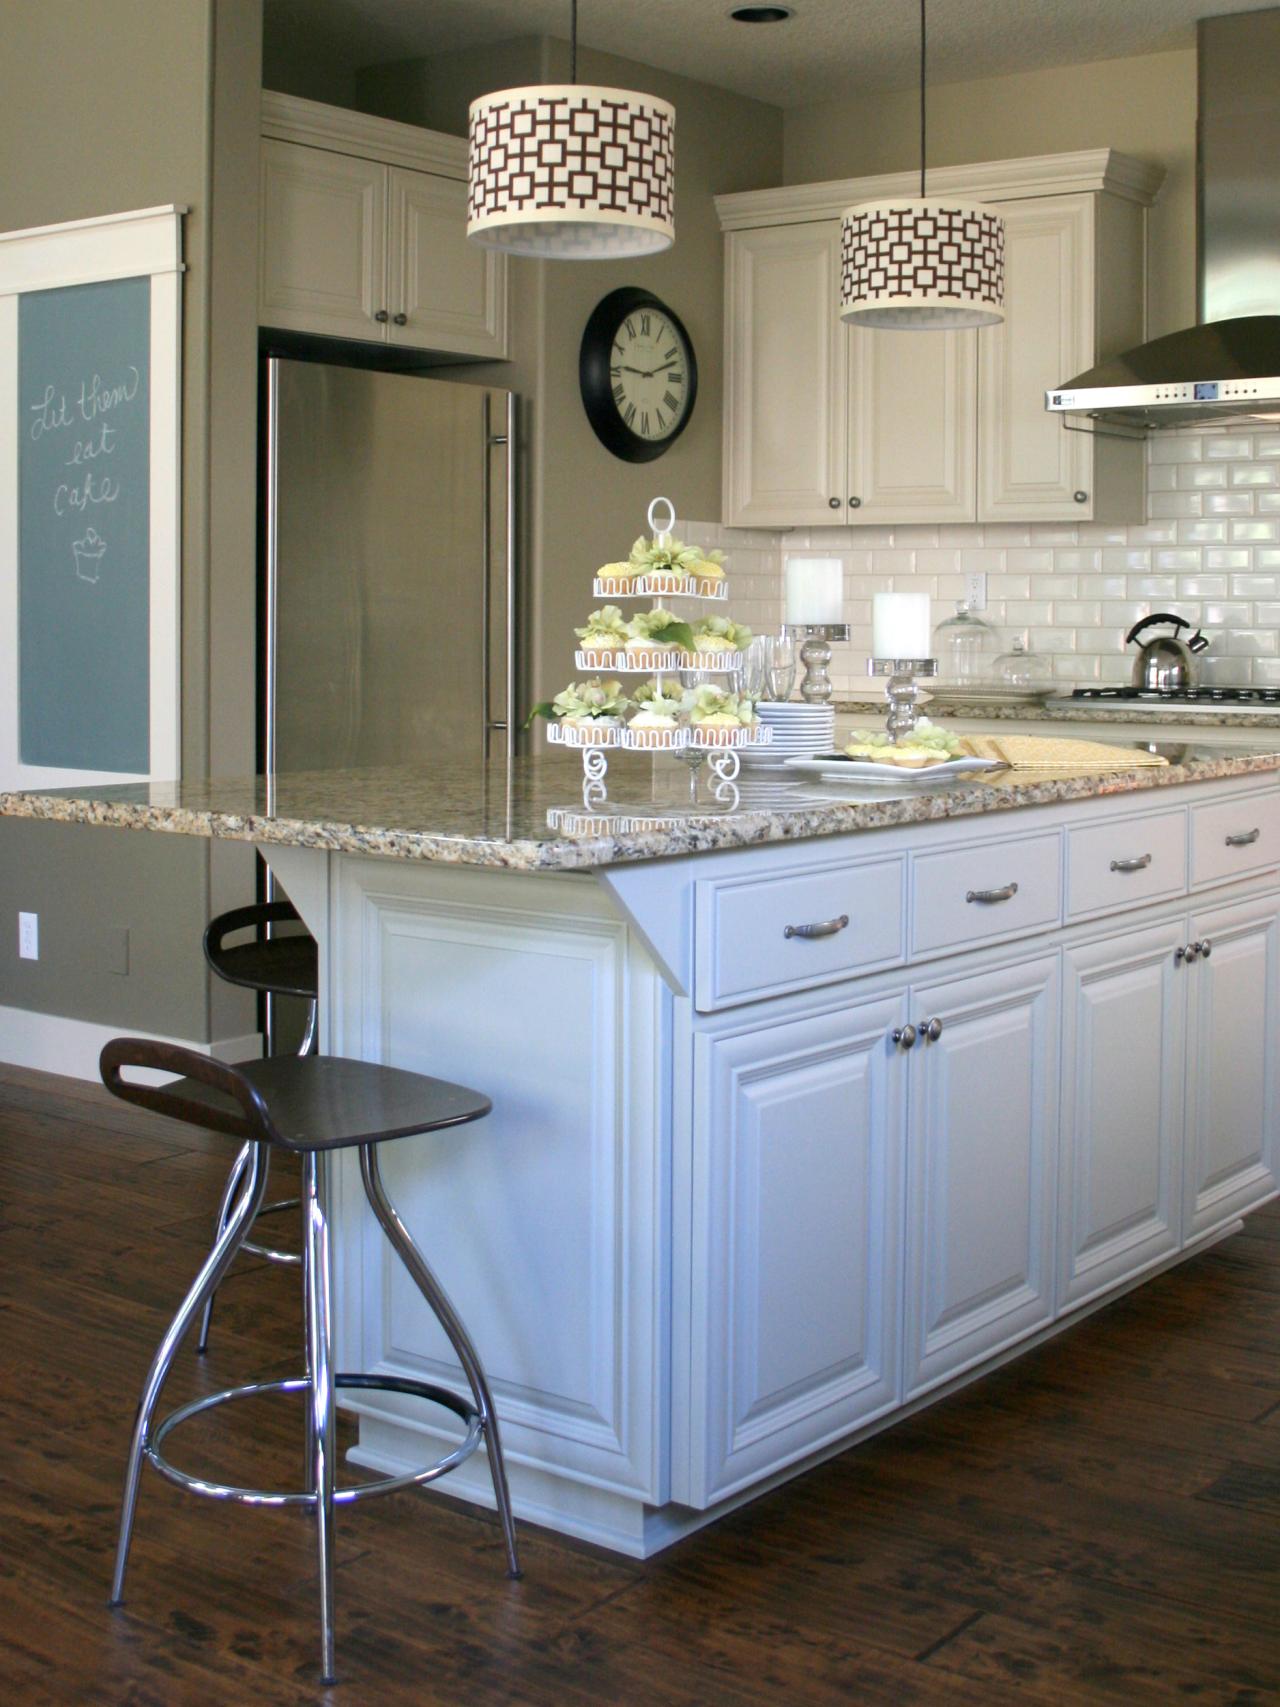 Kitchen With A Painted Island, Kitchen Island With Cabinets On Both Sides